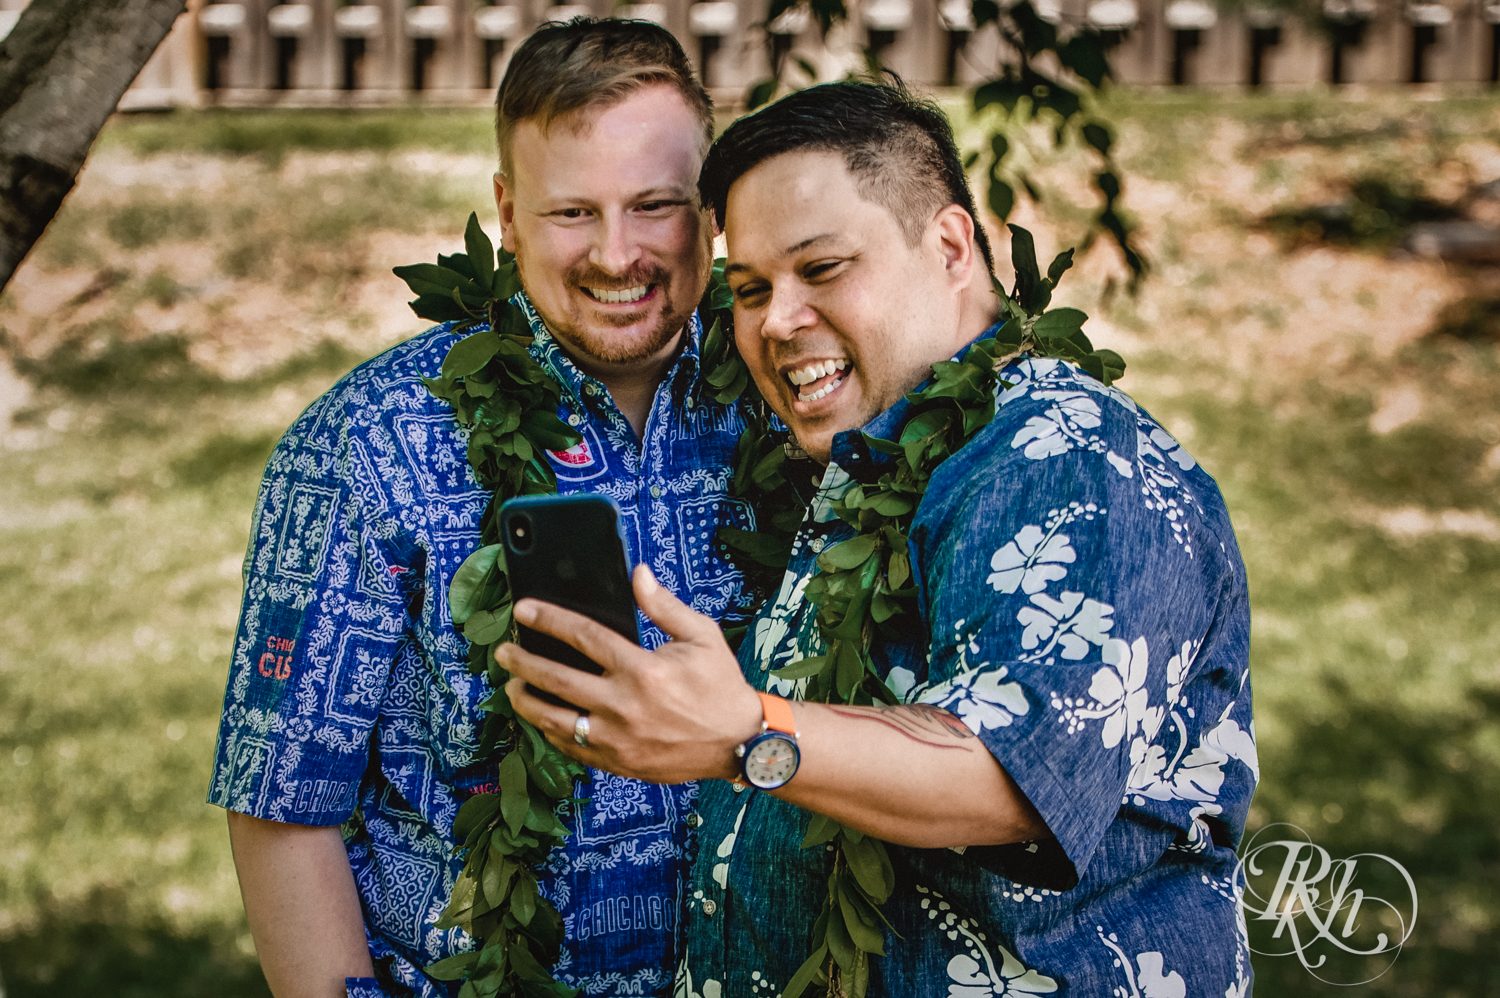 Two grooms talk to wedding guests on Zoom while wearing Hawaiian shirts and leis.